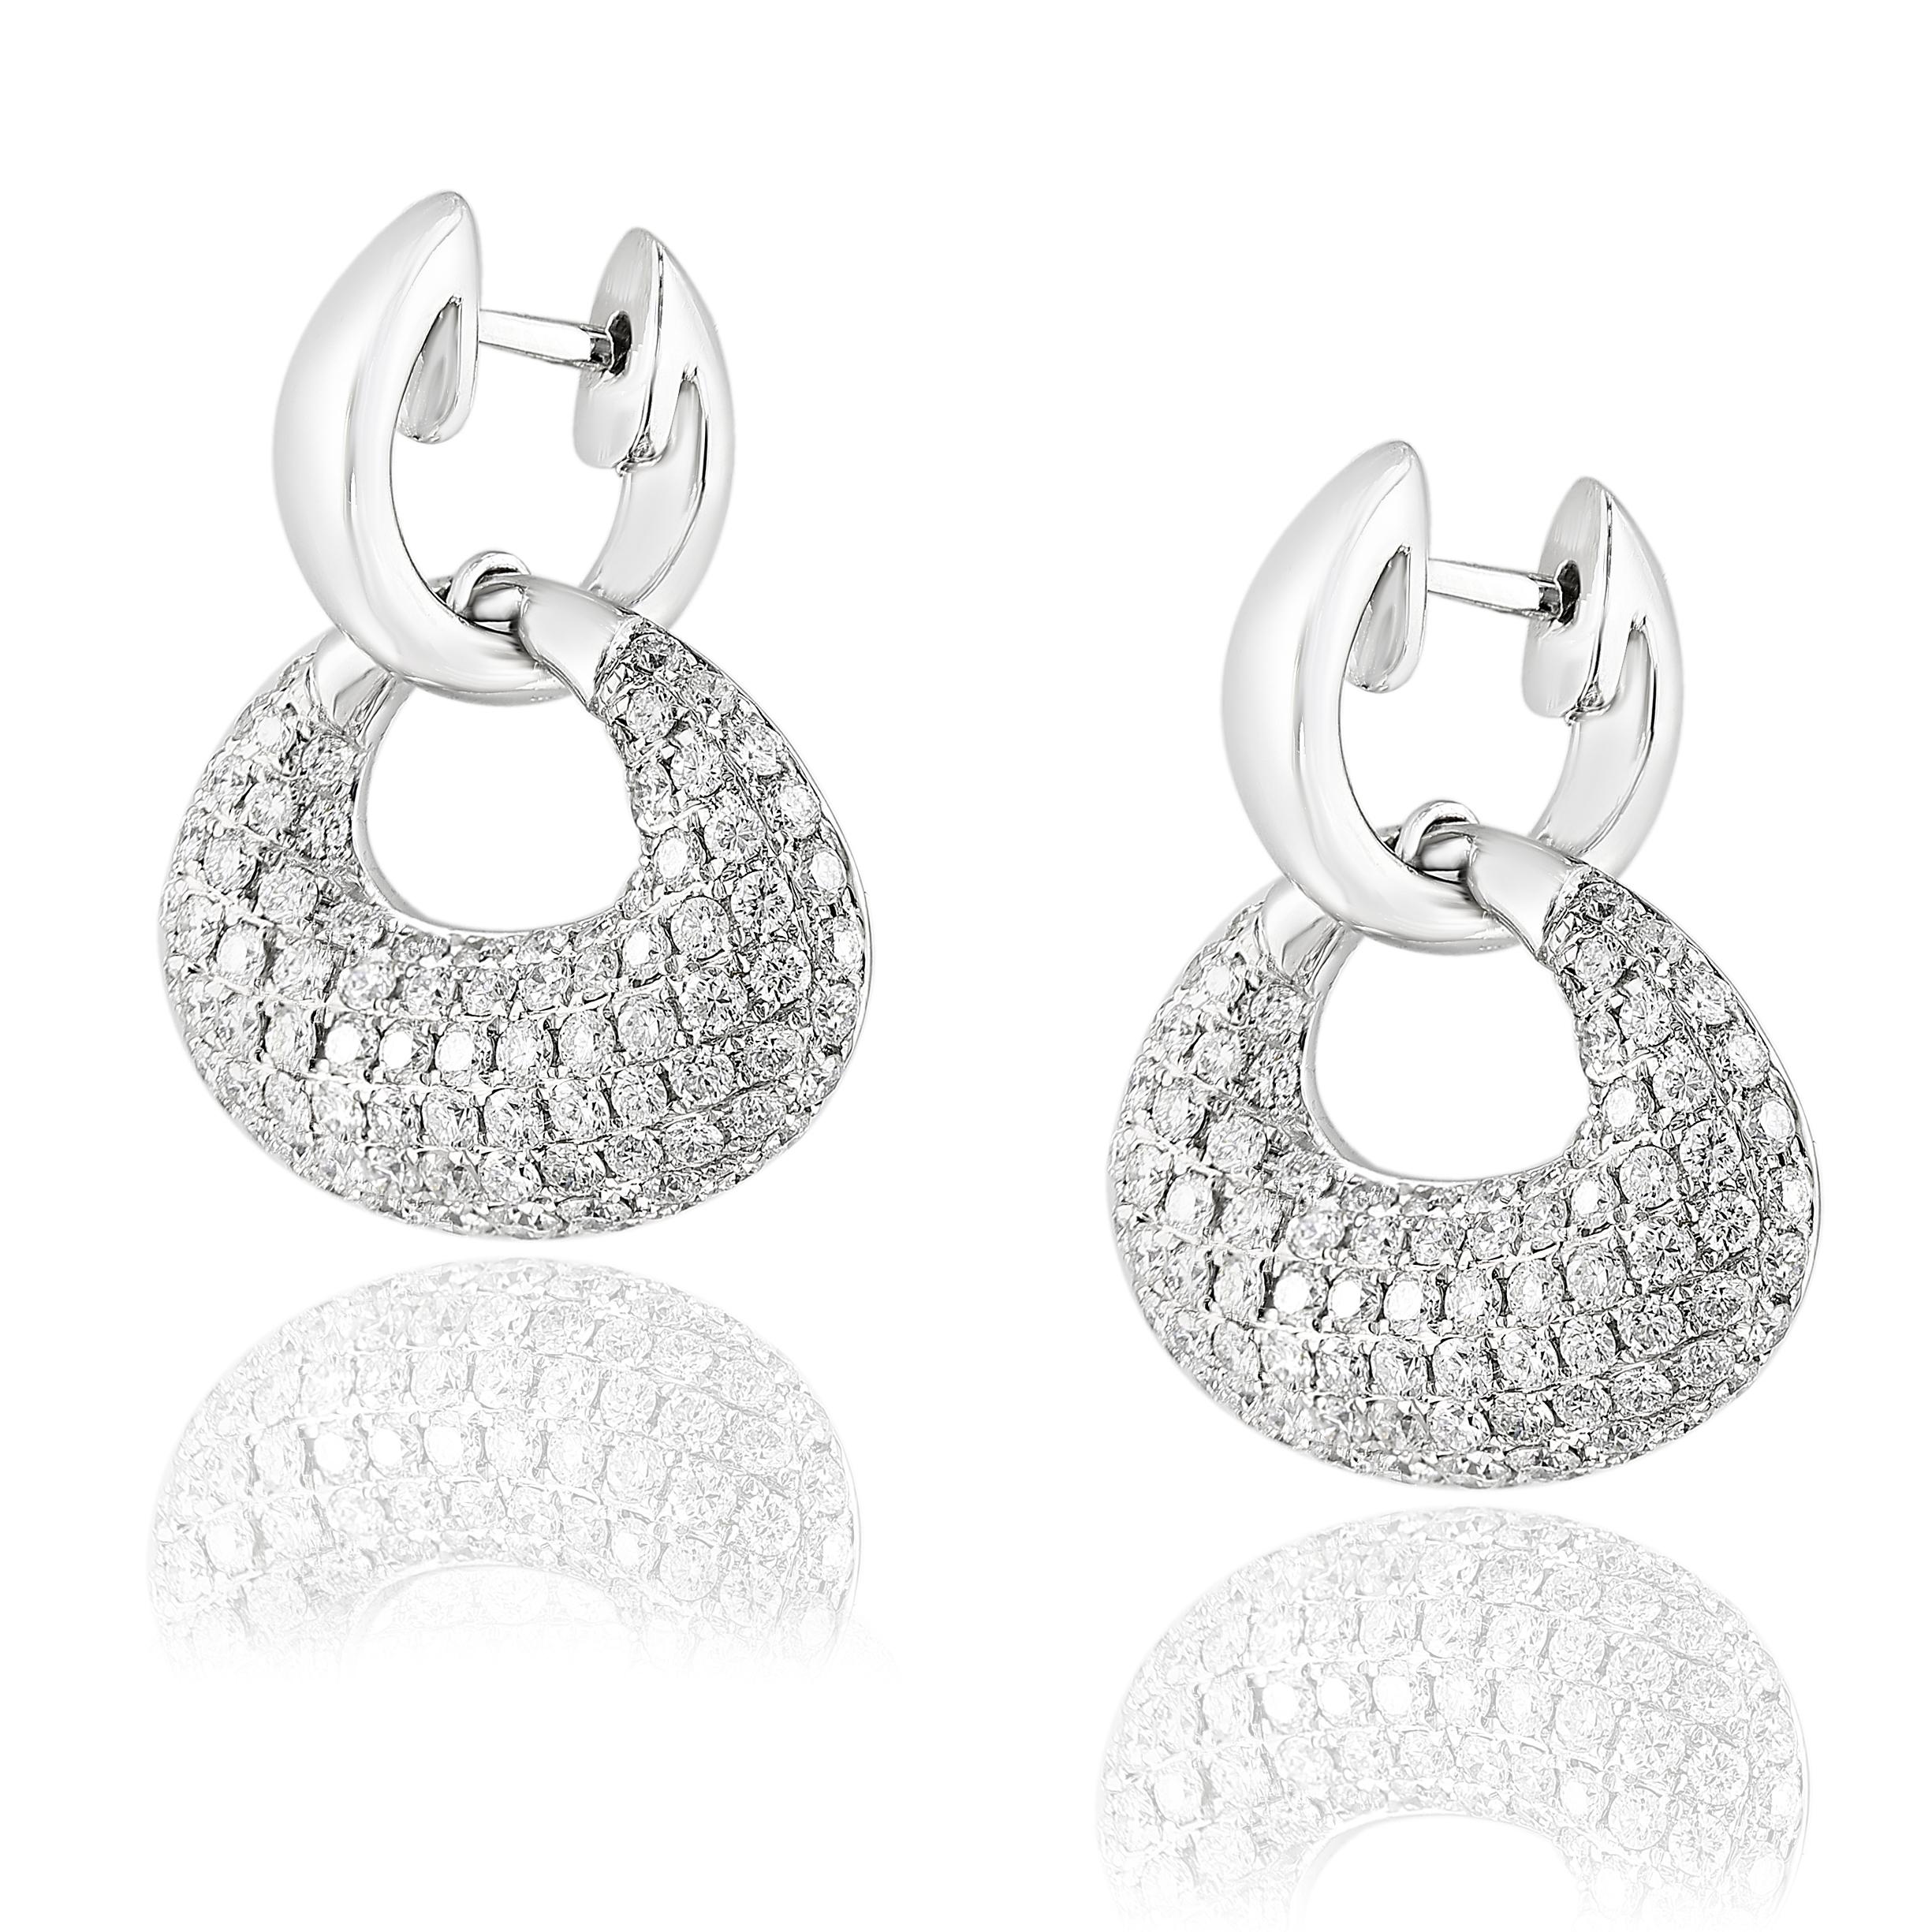 Very Stylish and Fashionable earrings showcasing brilliant cut diamonds, weighing 2.49 carats total in 18K white gold. 
All diamonds are GH color SI1 Clarity.
Can be made in yellow gold as well.
Style available in different price ranges. Prices are